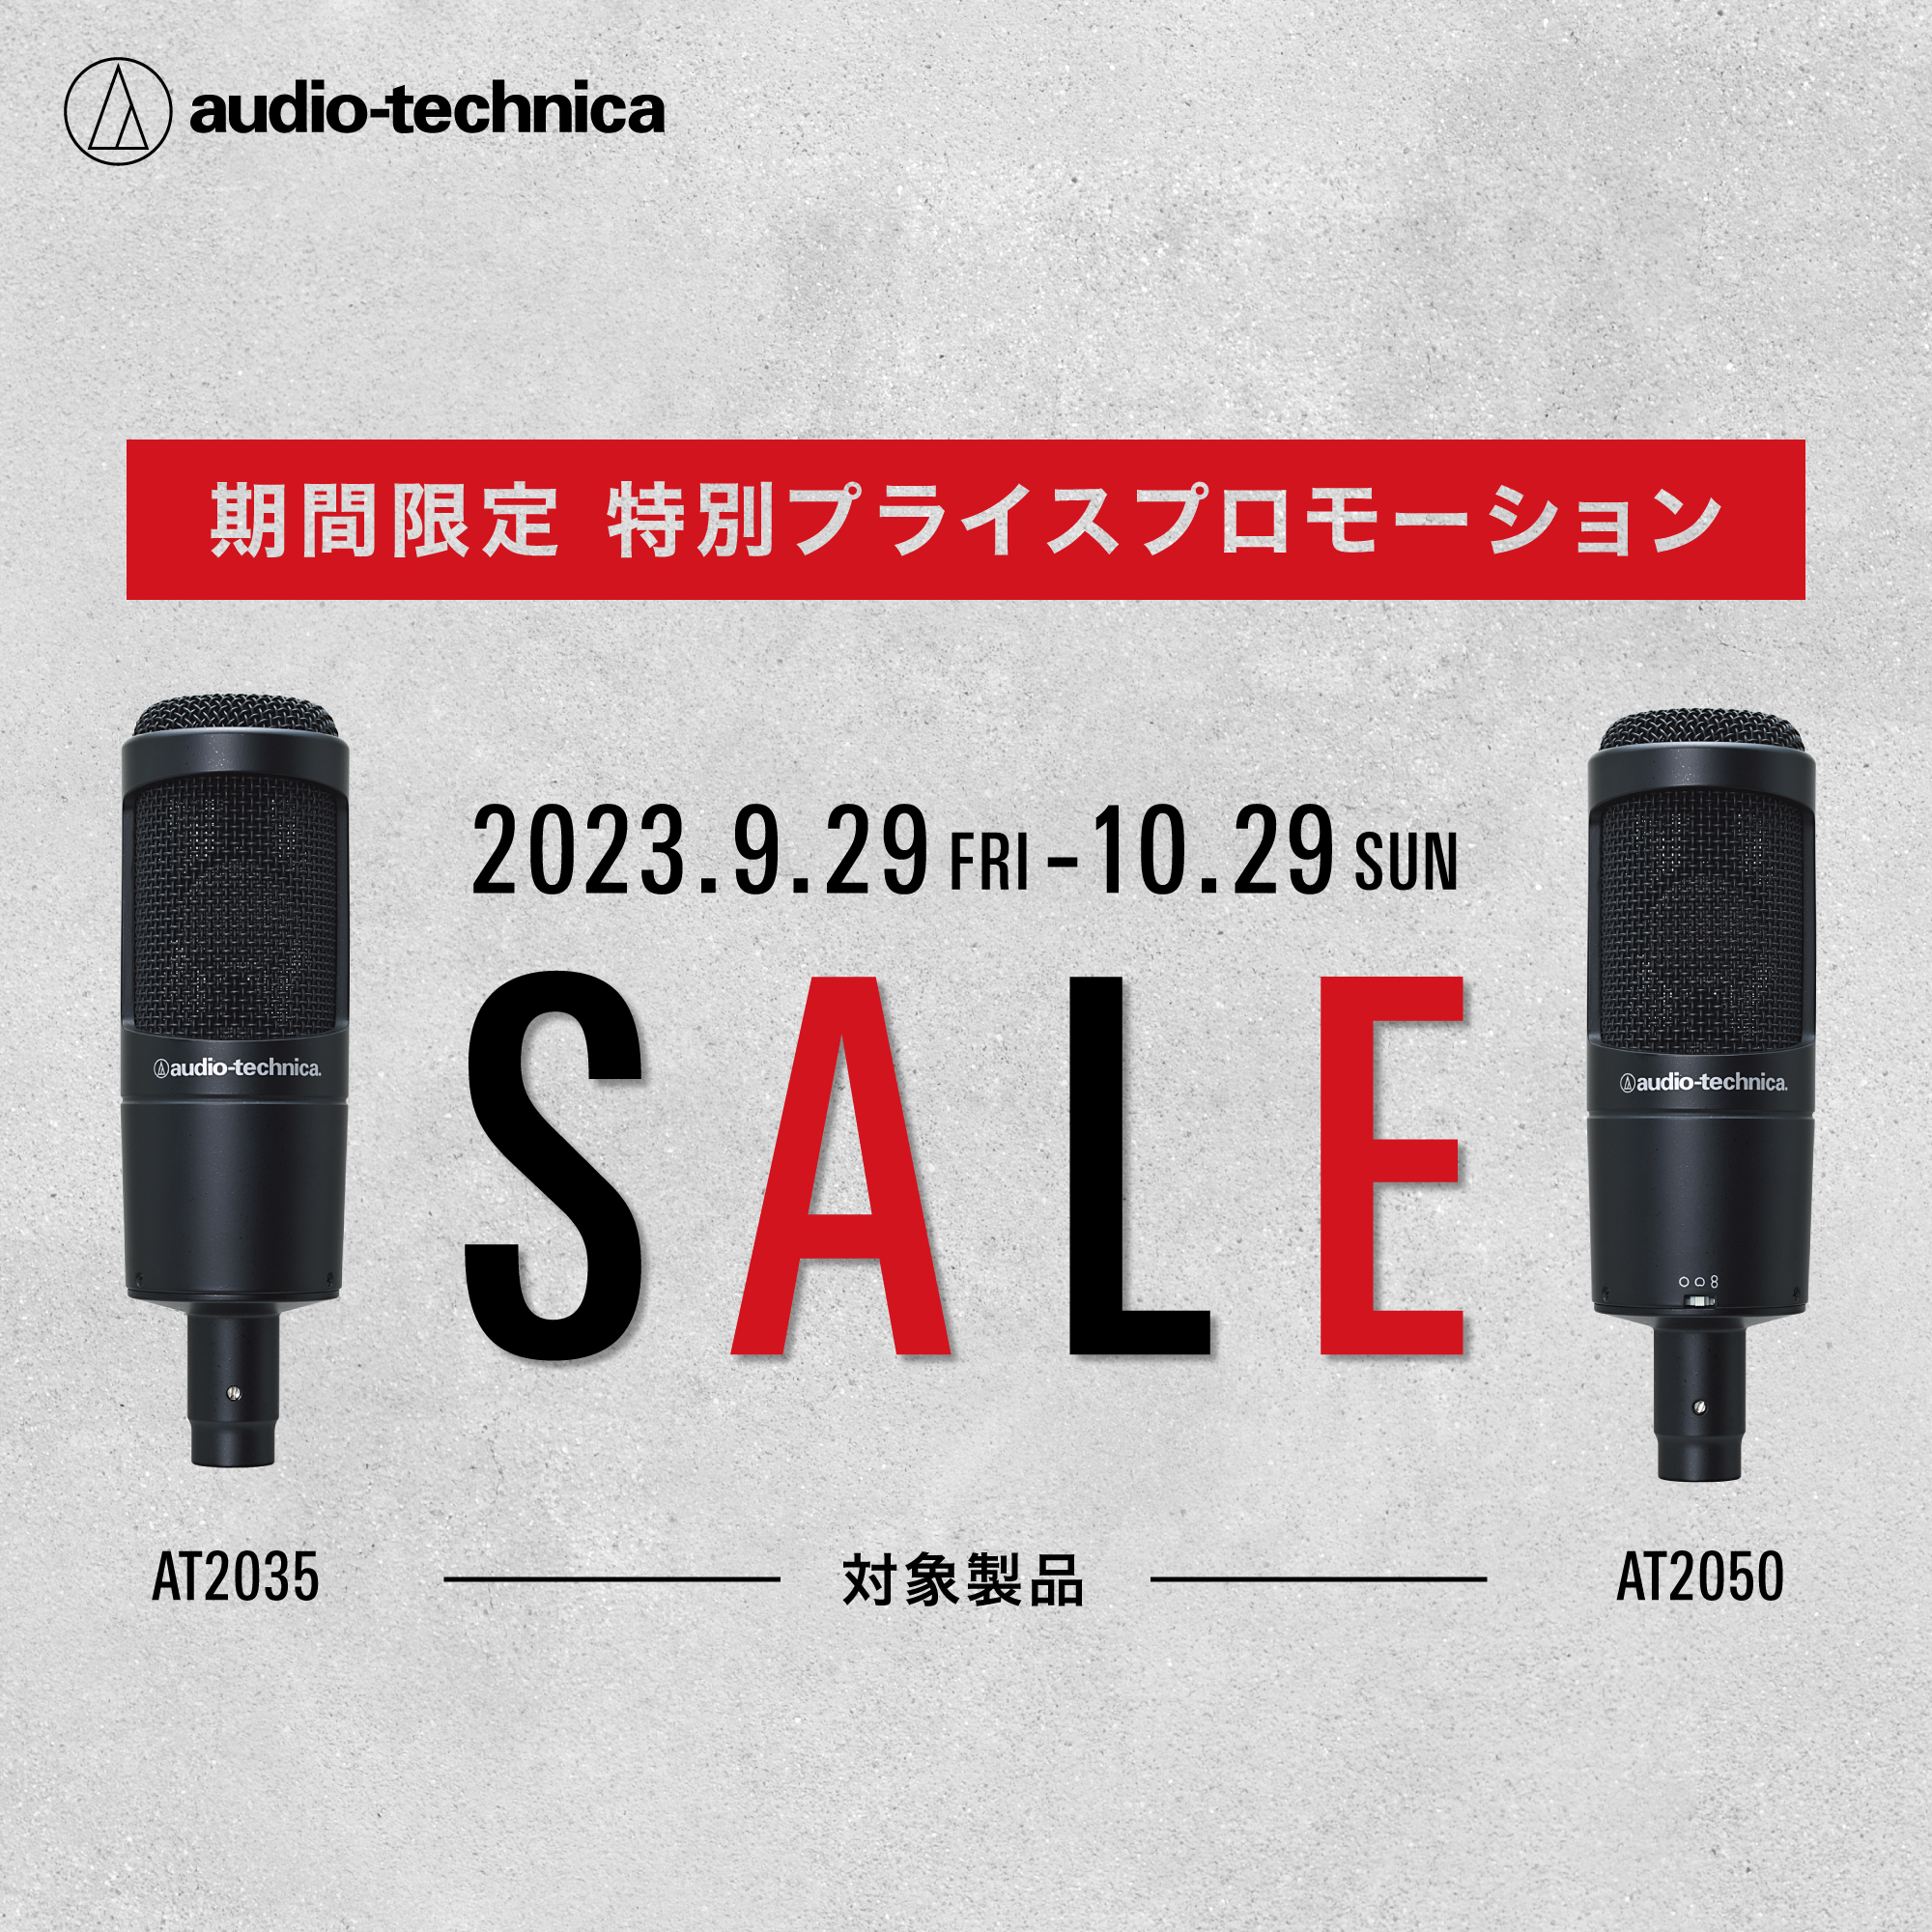 audio-technica AT2035/AT2050 期間限定キャンペーン開催決定！｜島村